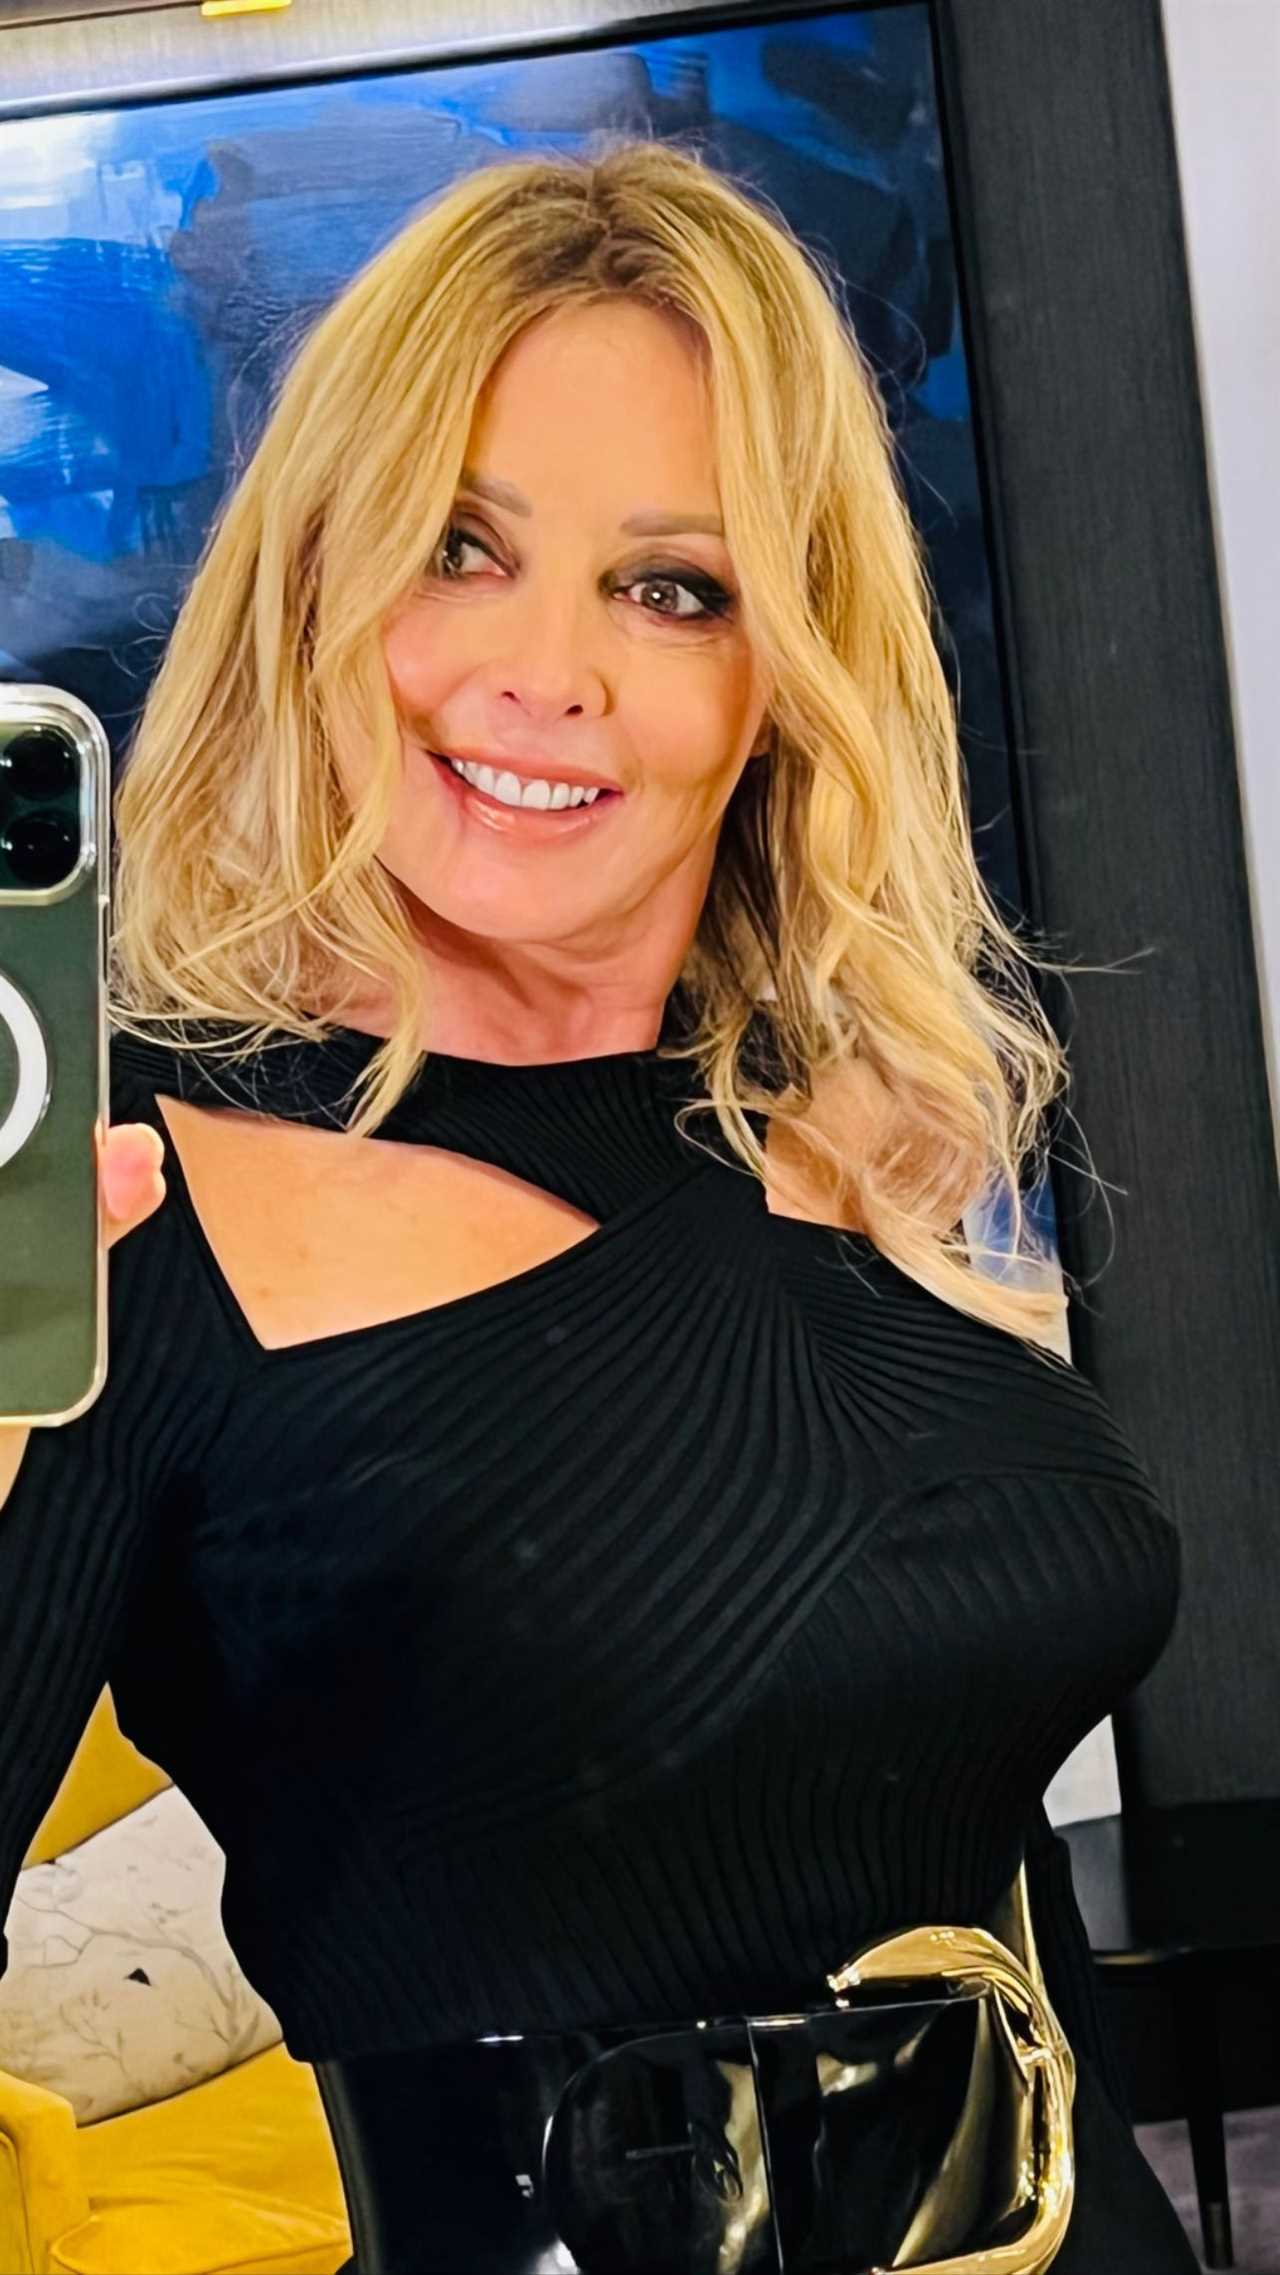 Carol Vorderman posts series of eye-popping pictures as she poses in tight black top